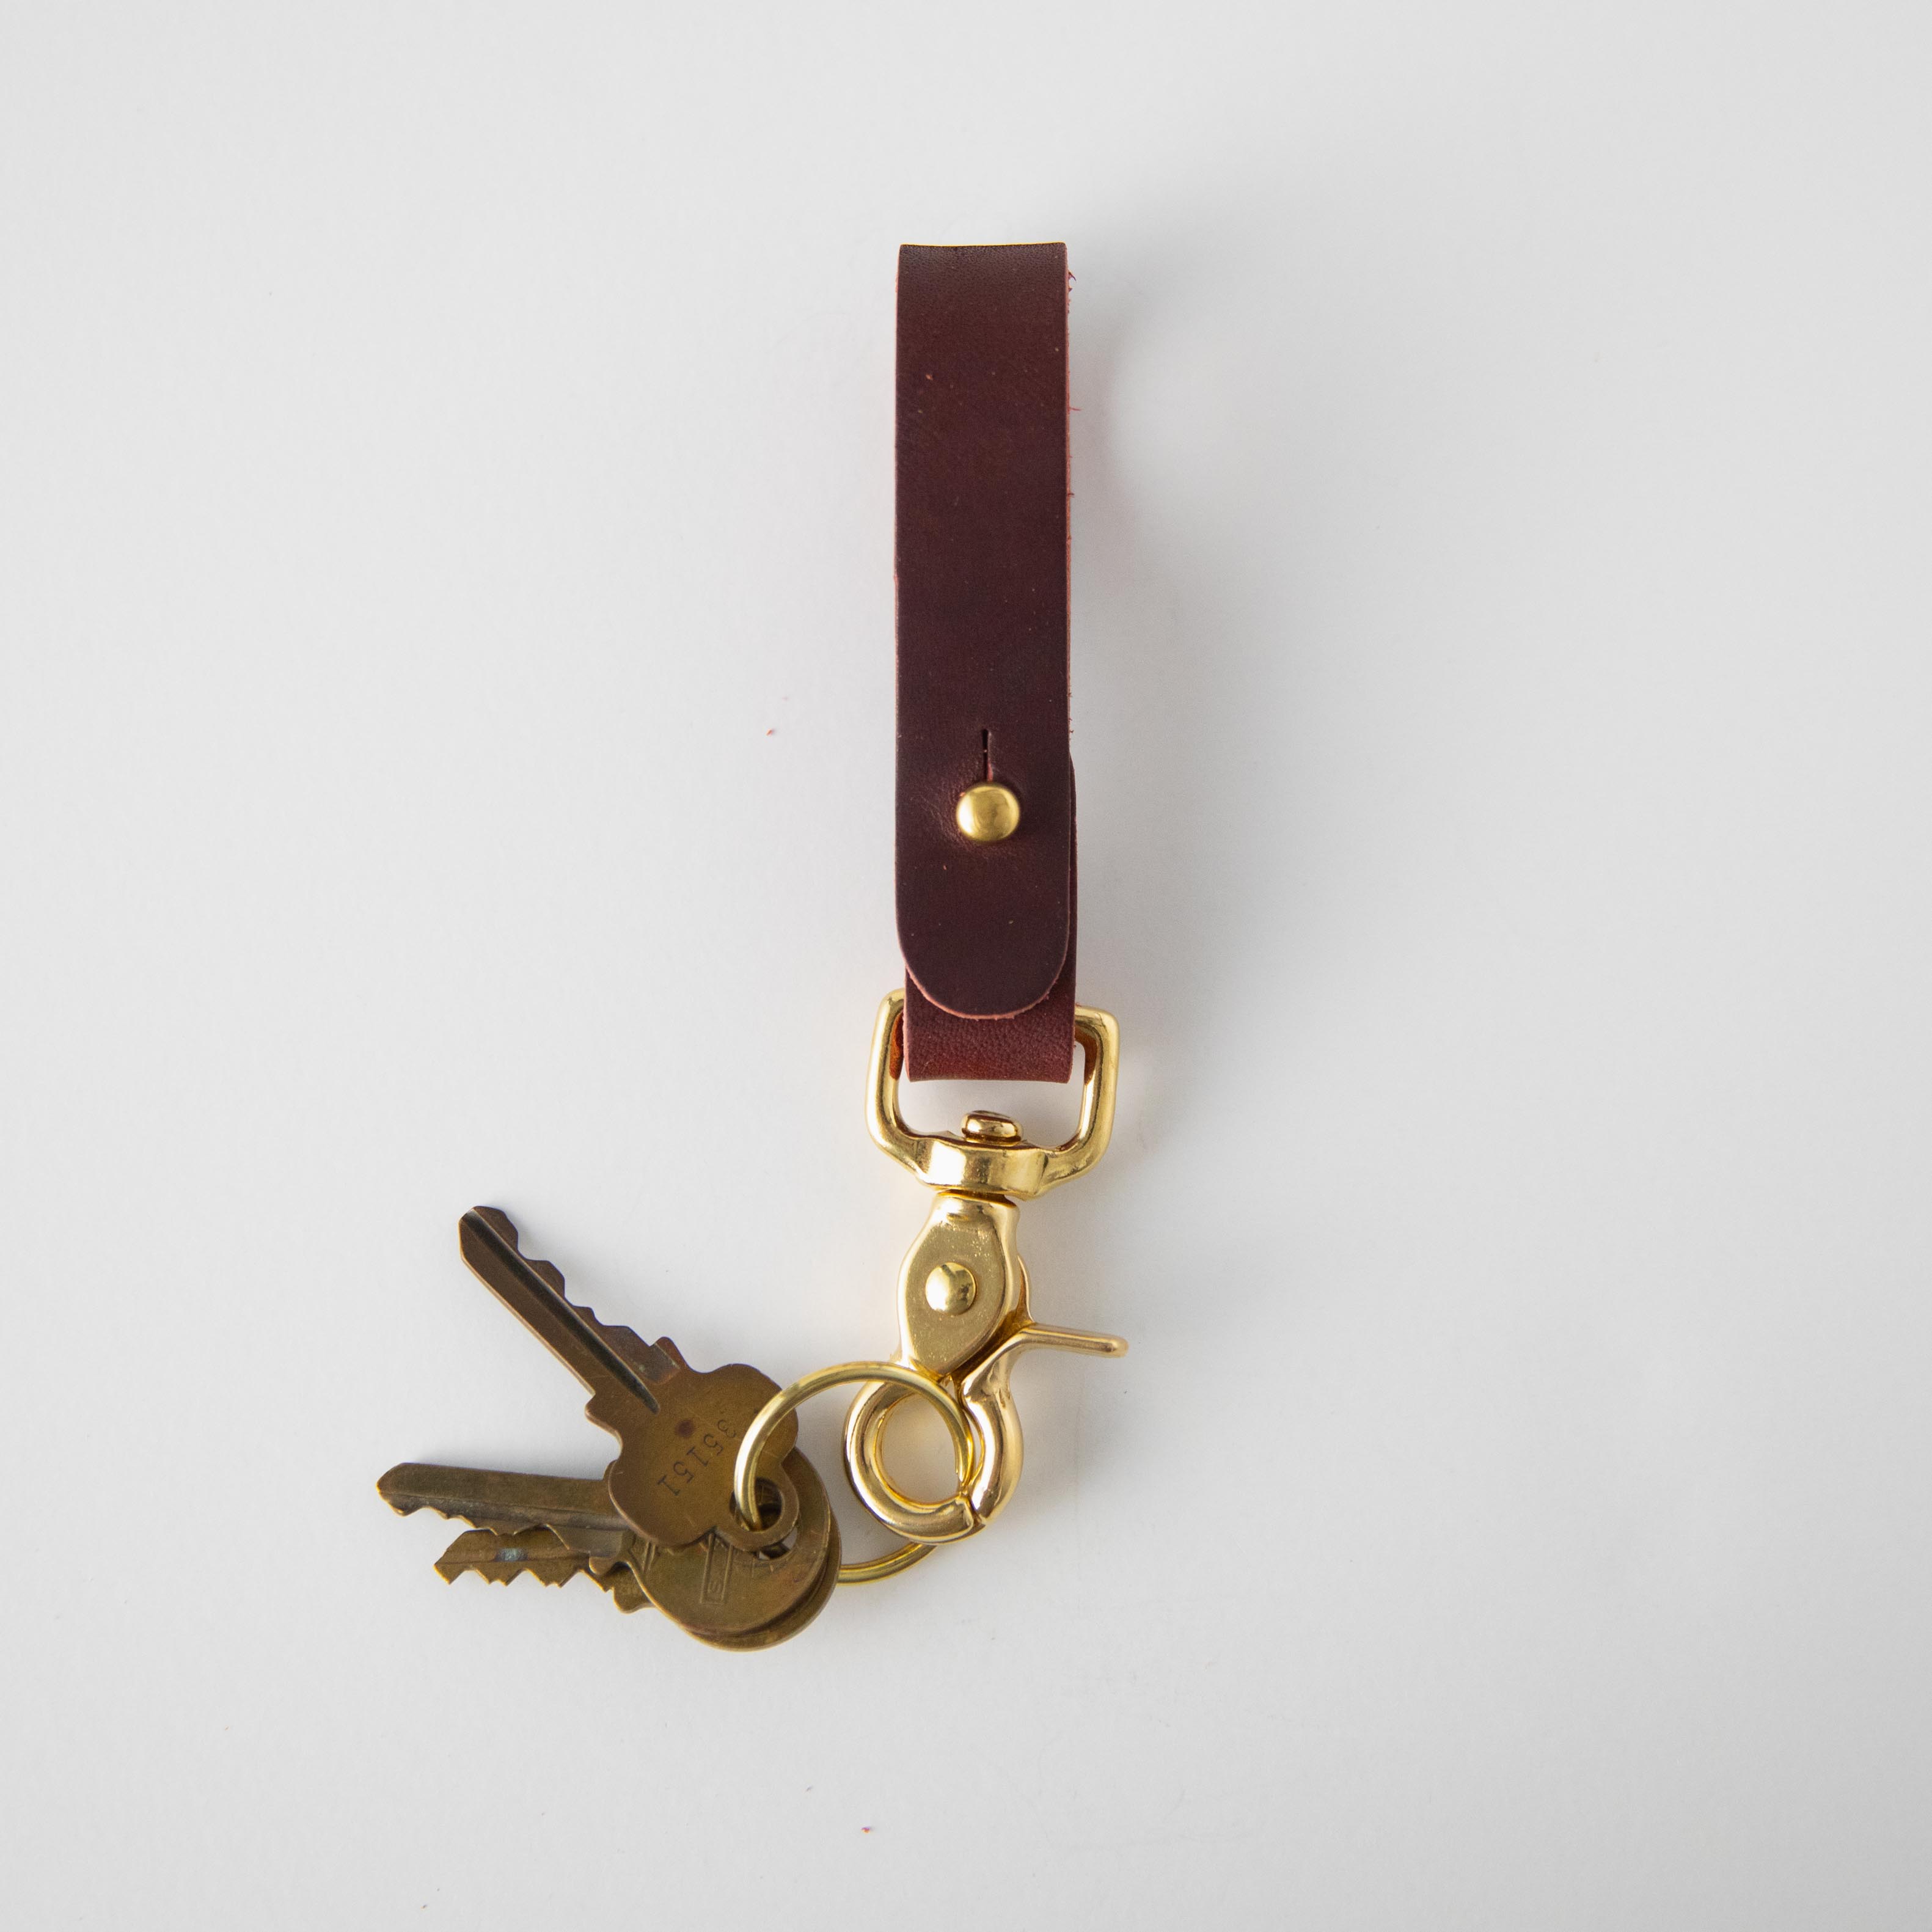 Oxblood Key Lanyard- leather keychain for men and women - KMM &amp; Co.